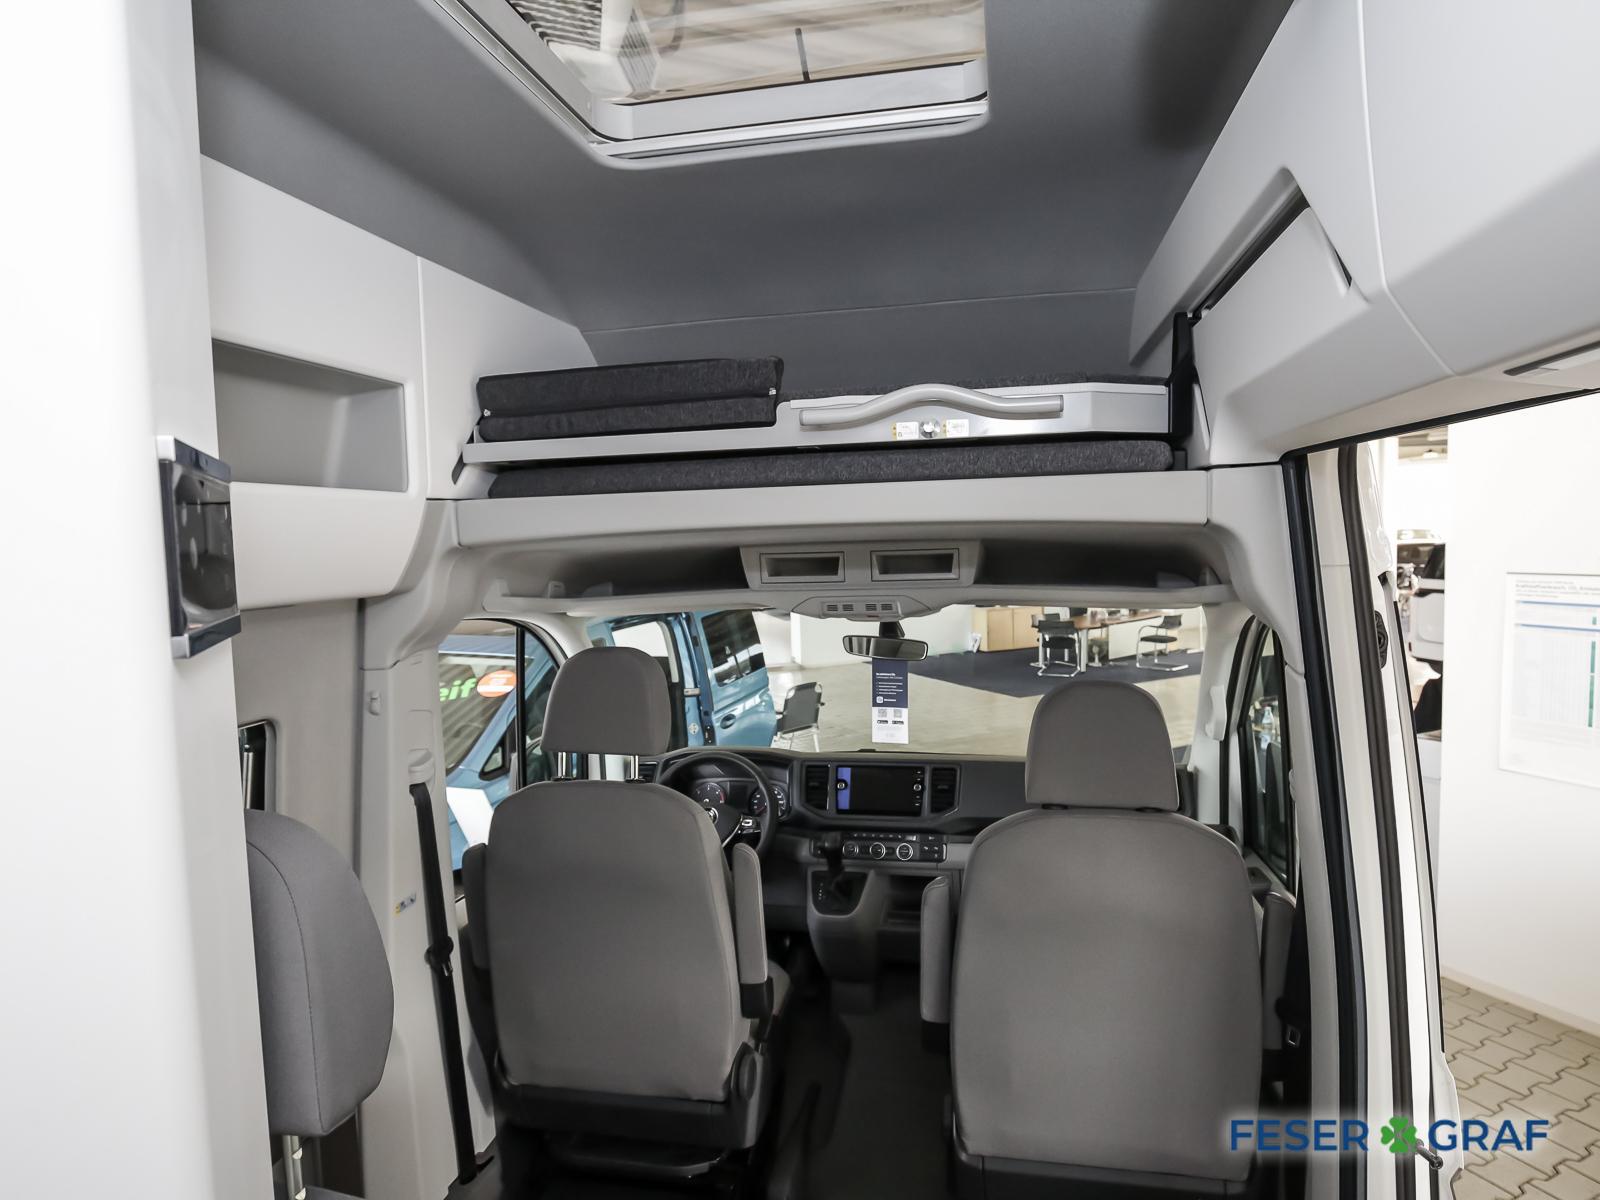 VW CRAFTER (13/20)